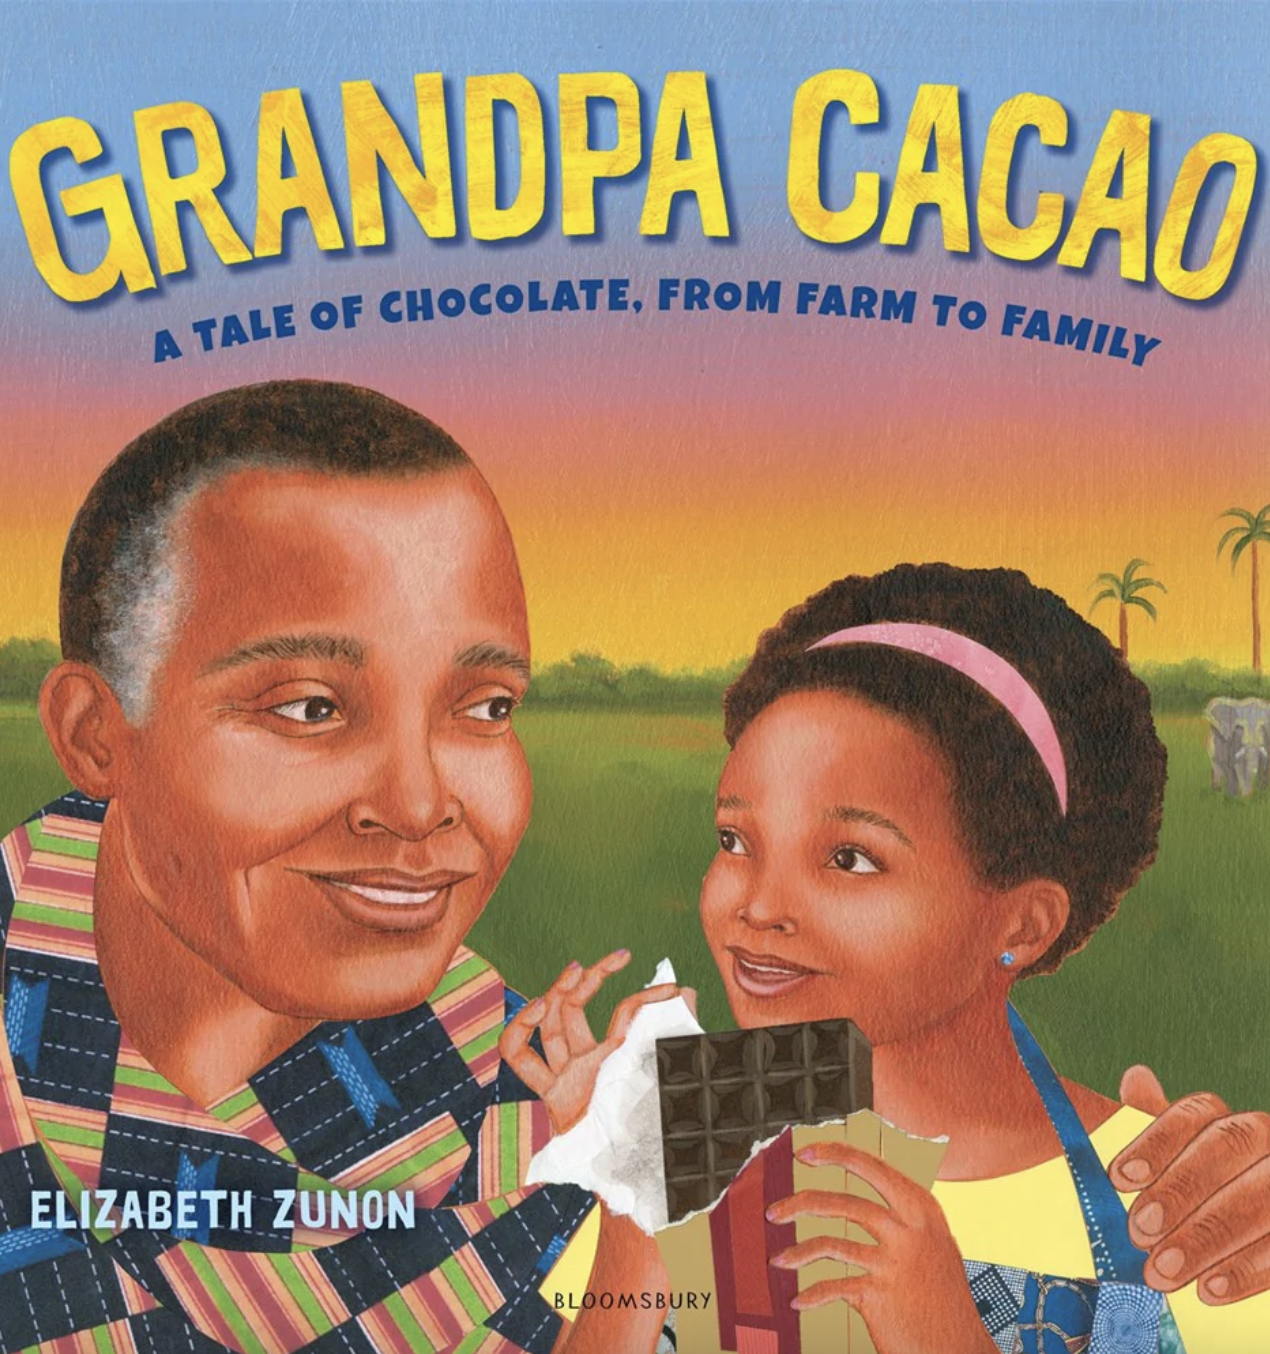 Books cover for Grandpa Cacao showing a grandfather and granddaughter.